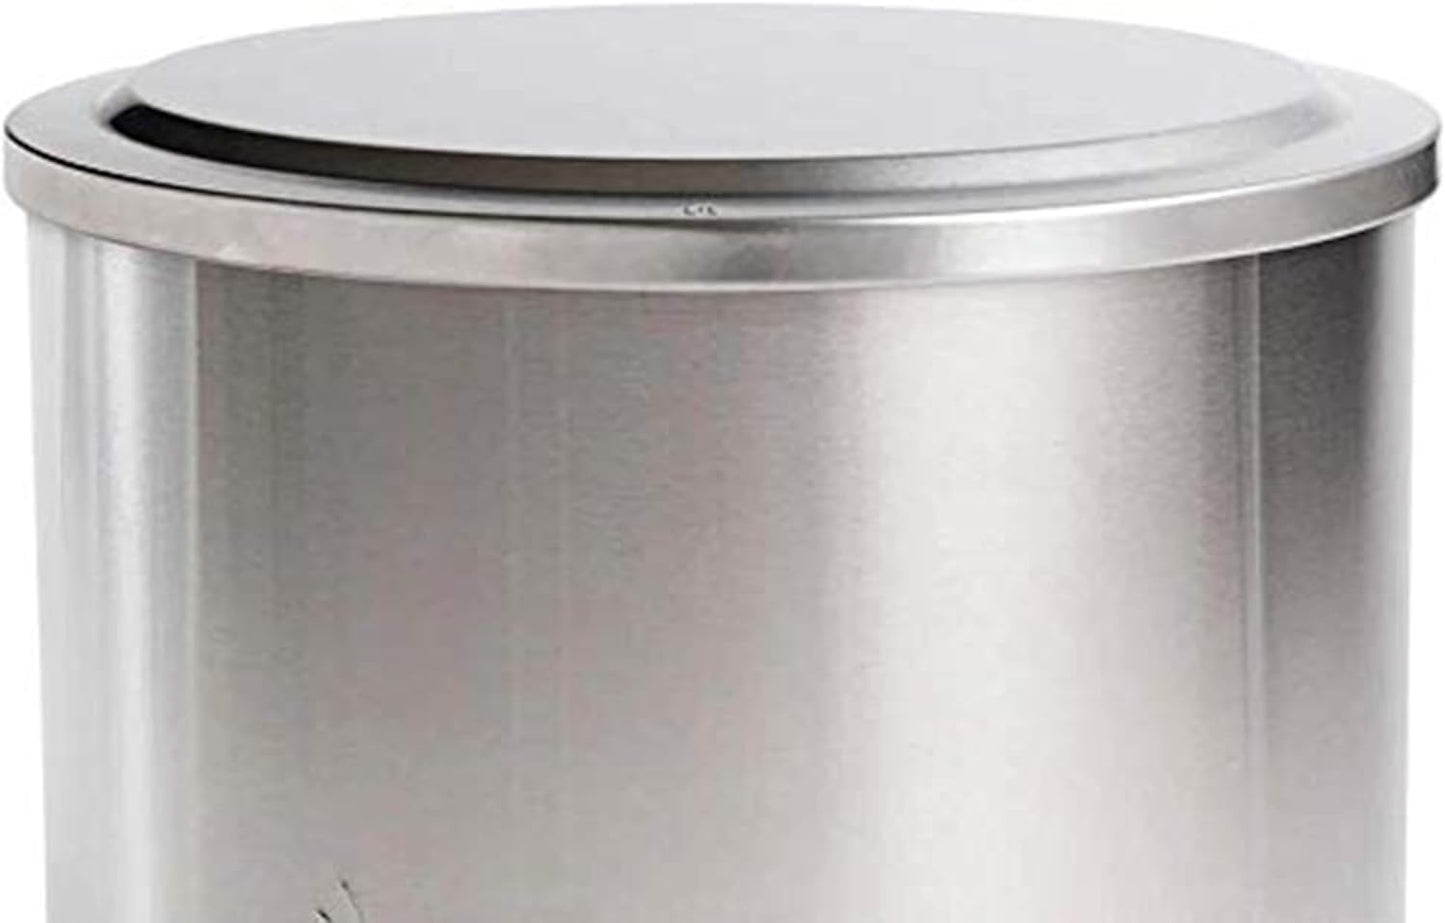 Solo Stove Bonfire Lid 304 Stainless Steel Bonfire Fire Pit Accessories for Outdoor Fire Pits and Camping Accessories